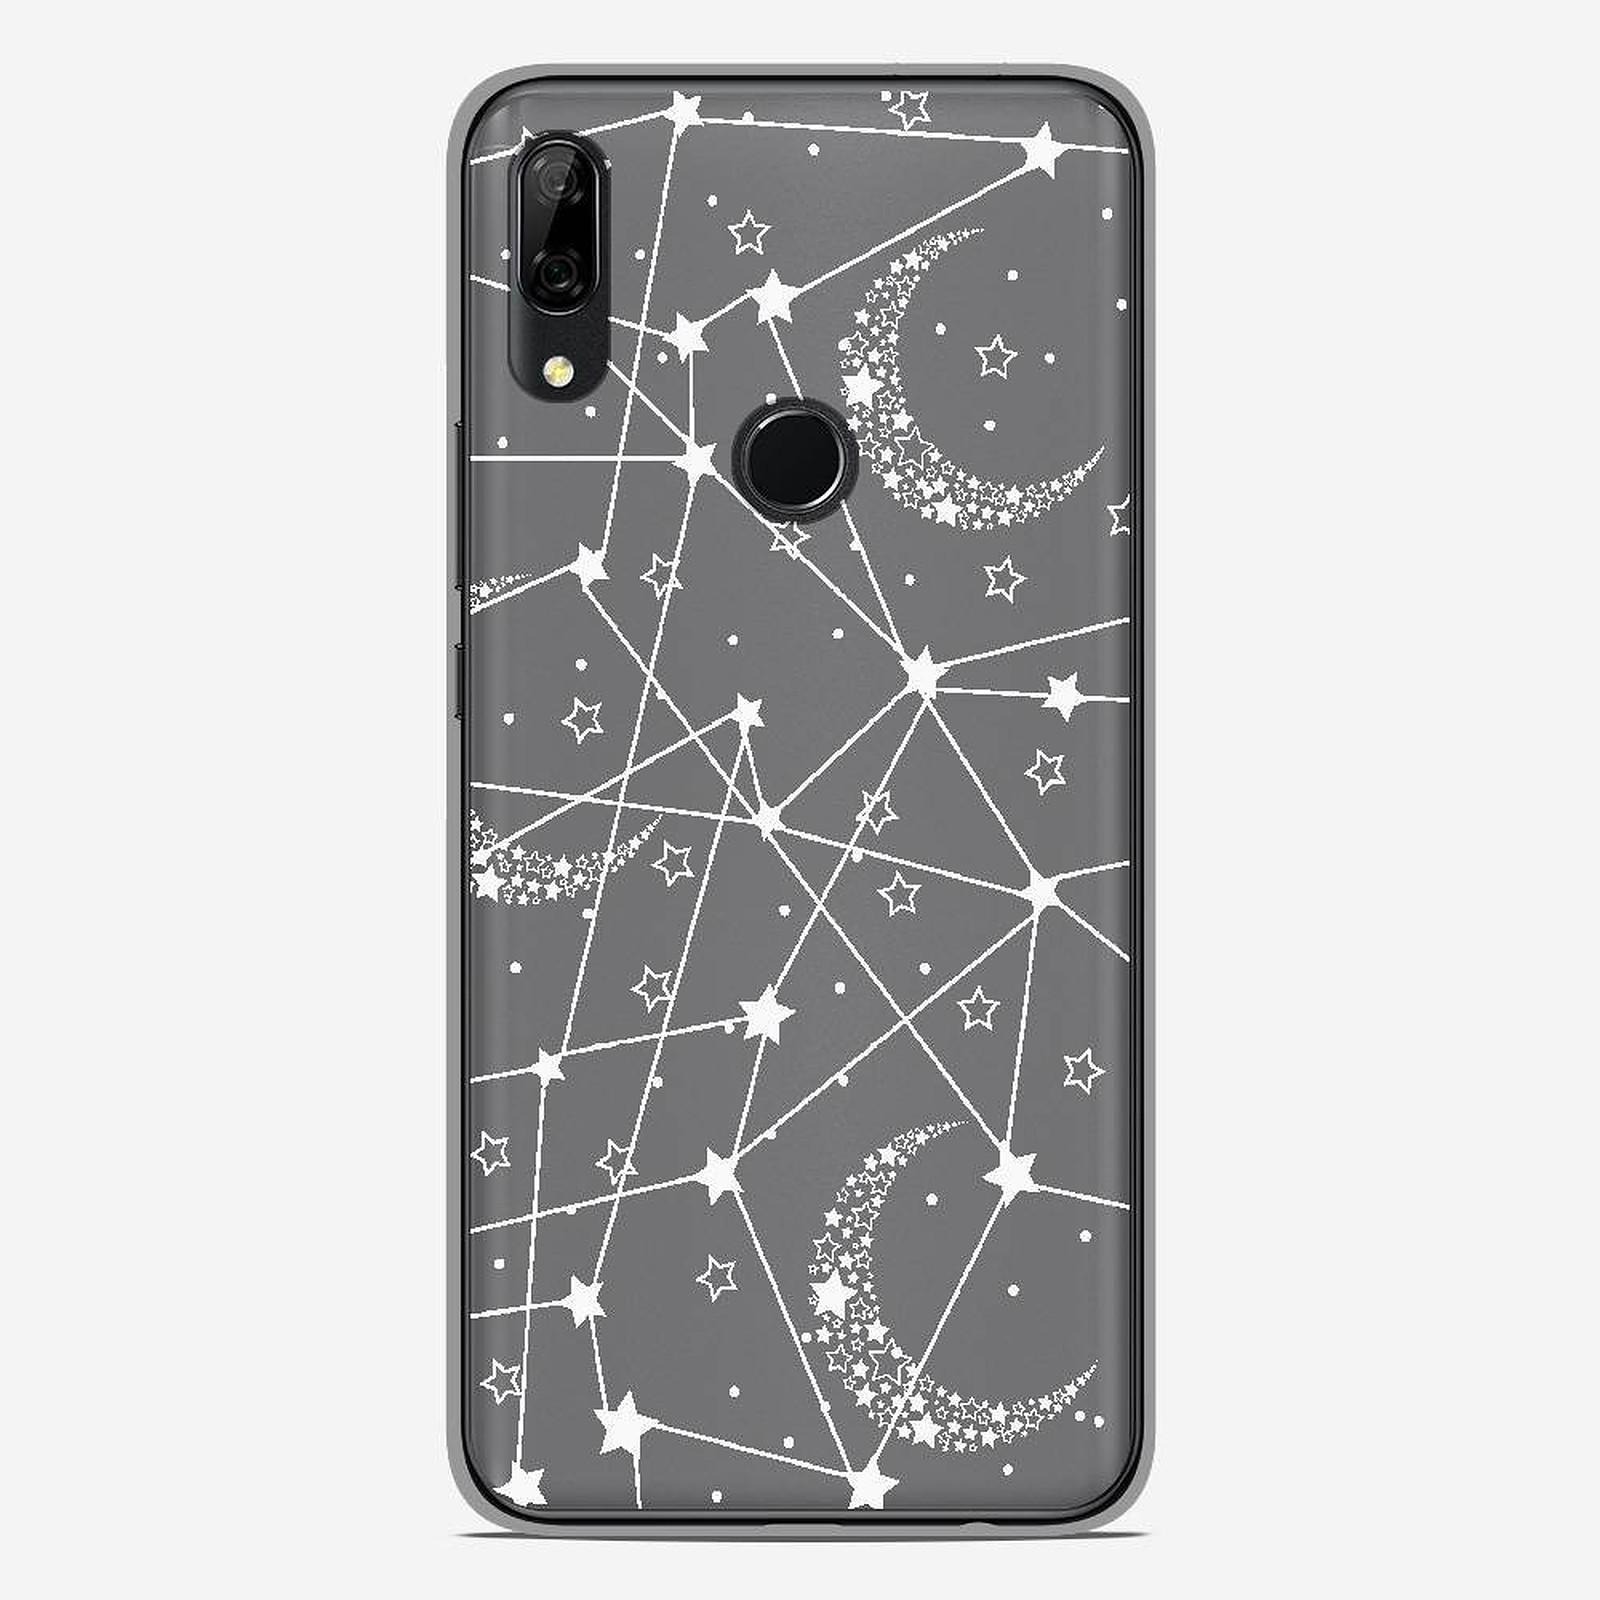 1001 Coques Coque silicone gel Huawei P Smart Z motif Lignes etoilees - Coque telephone 1001Coques